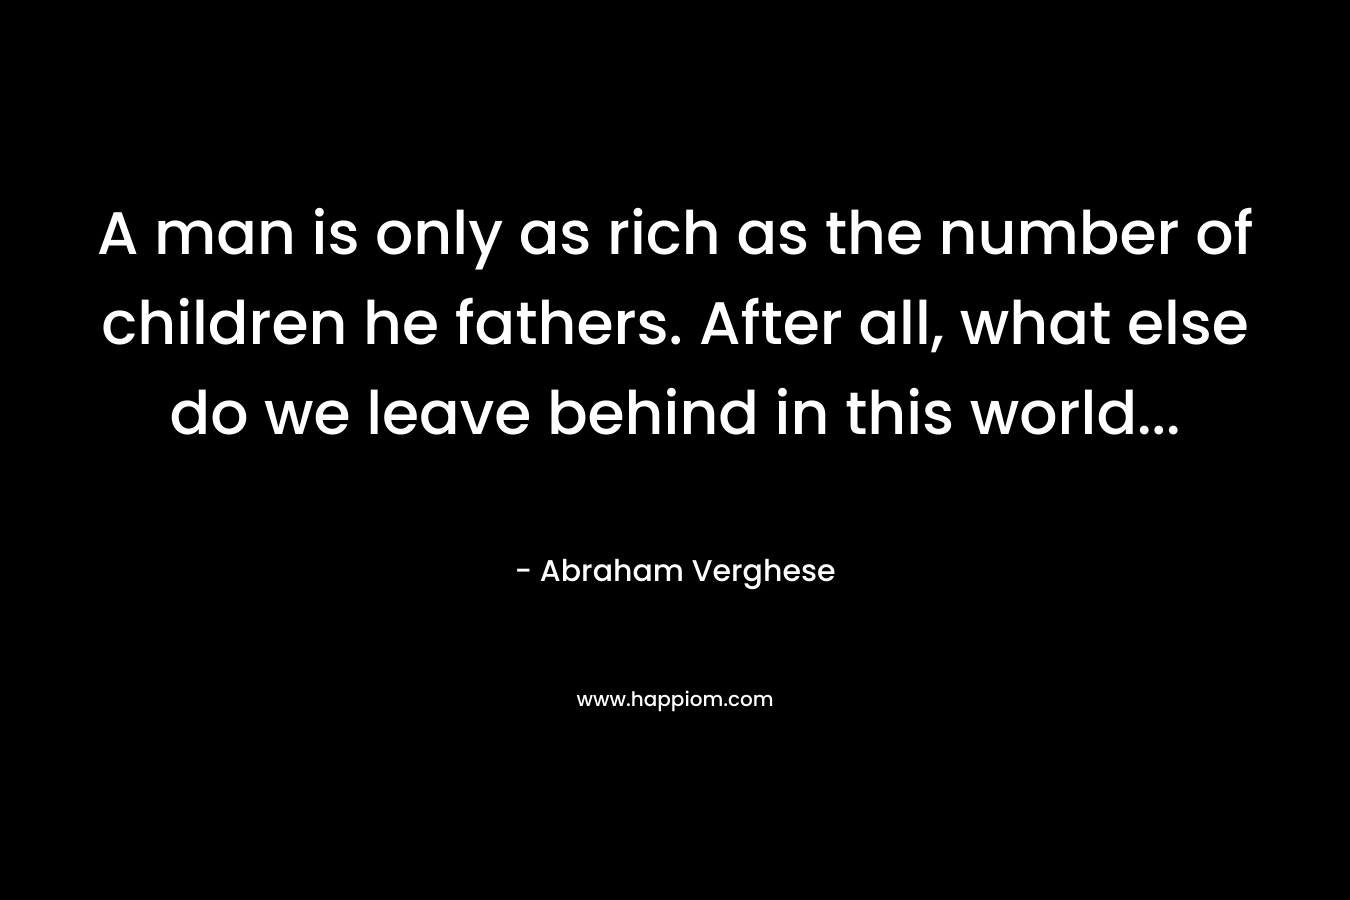 A man is only as rich as the number of children he fathers. After all, what else do we leave behind in this world...